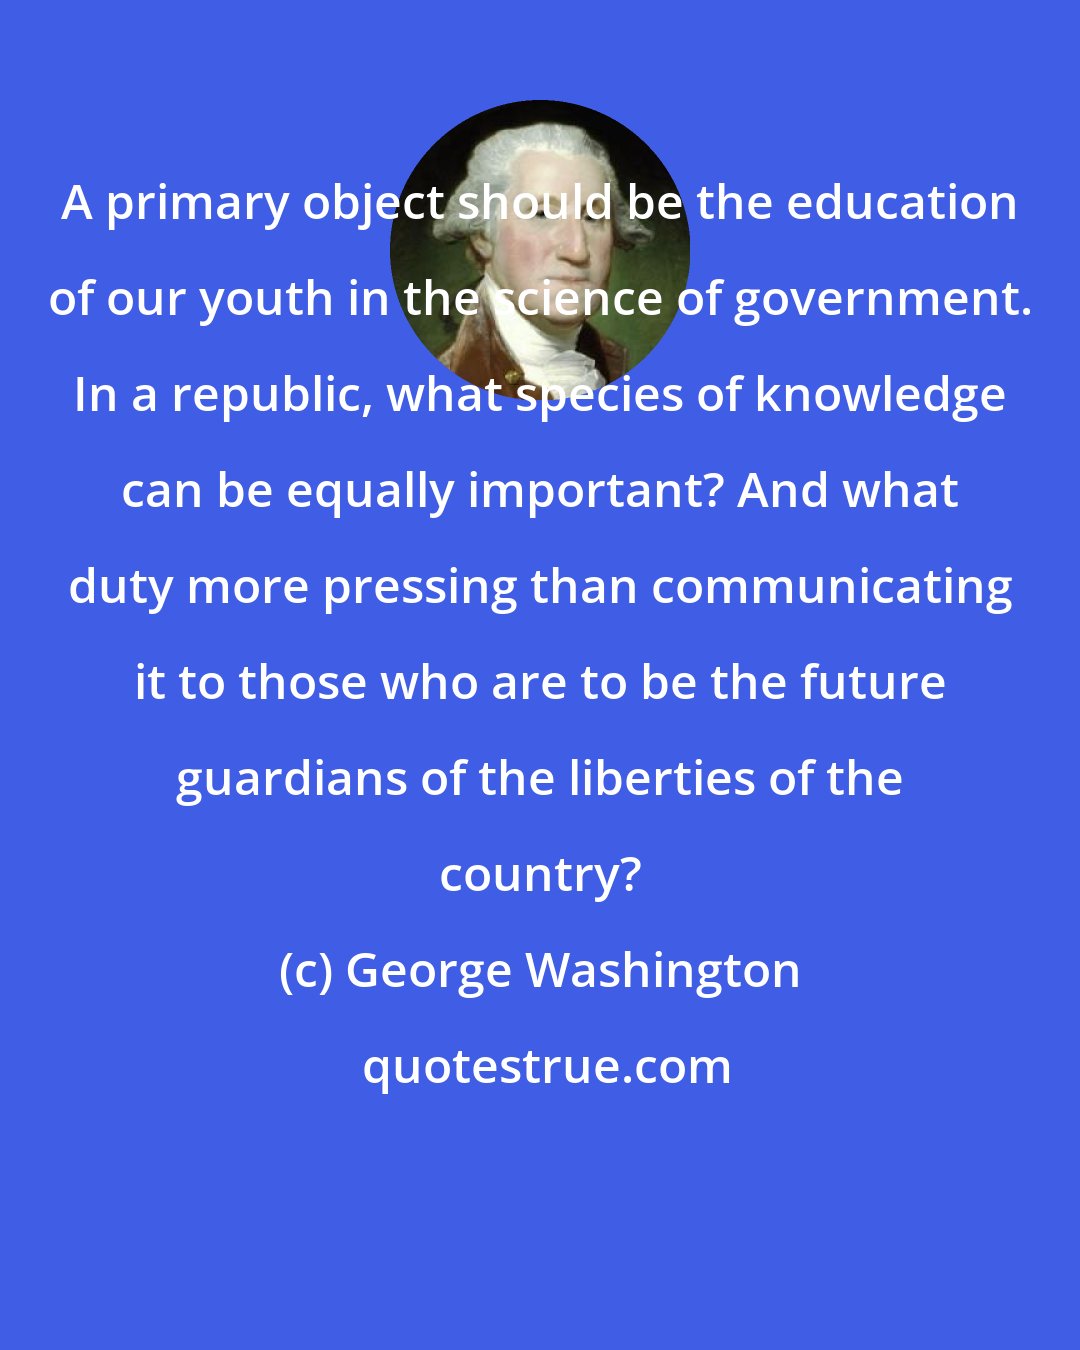 George Washington: A primary object should be the education of our youth in the science of government. In a republic, what species of knowledge can be equally important? And what duty more pressing than communicating it to those who are to be the future guardians of the liberties of the country?